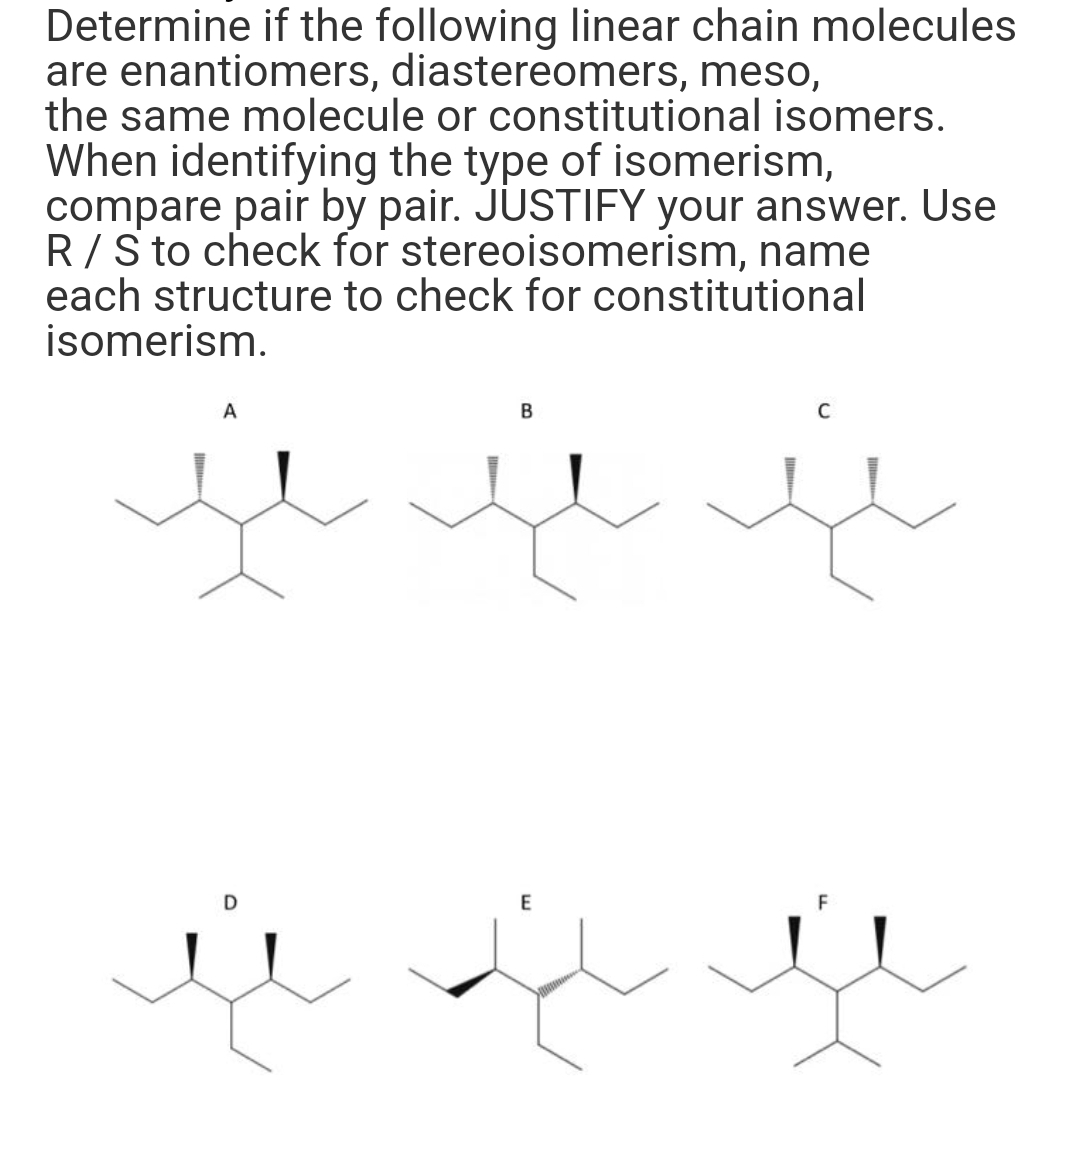 Determine if the following linear chain molecules
are enantiomers, diastereomers, meso,
the same molecule or constitutional isomers.
When identifying the type of isomerism,
compare pair by pair. JUSTIFY your answer. Use
R/S to check for stereoisomerism, name
each structure to check for constitutional
isomerism.
A
D
B
E
C
F